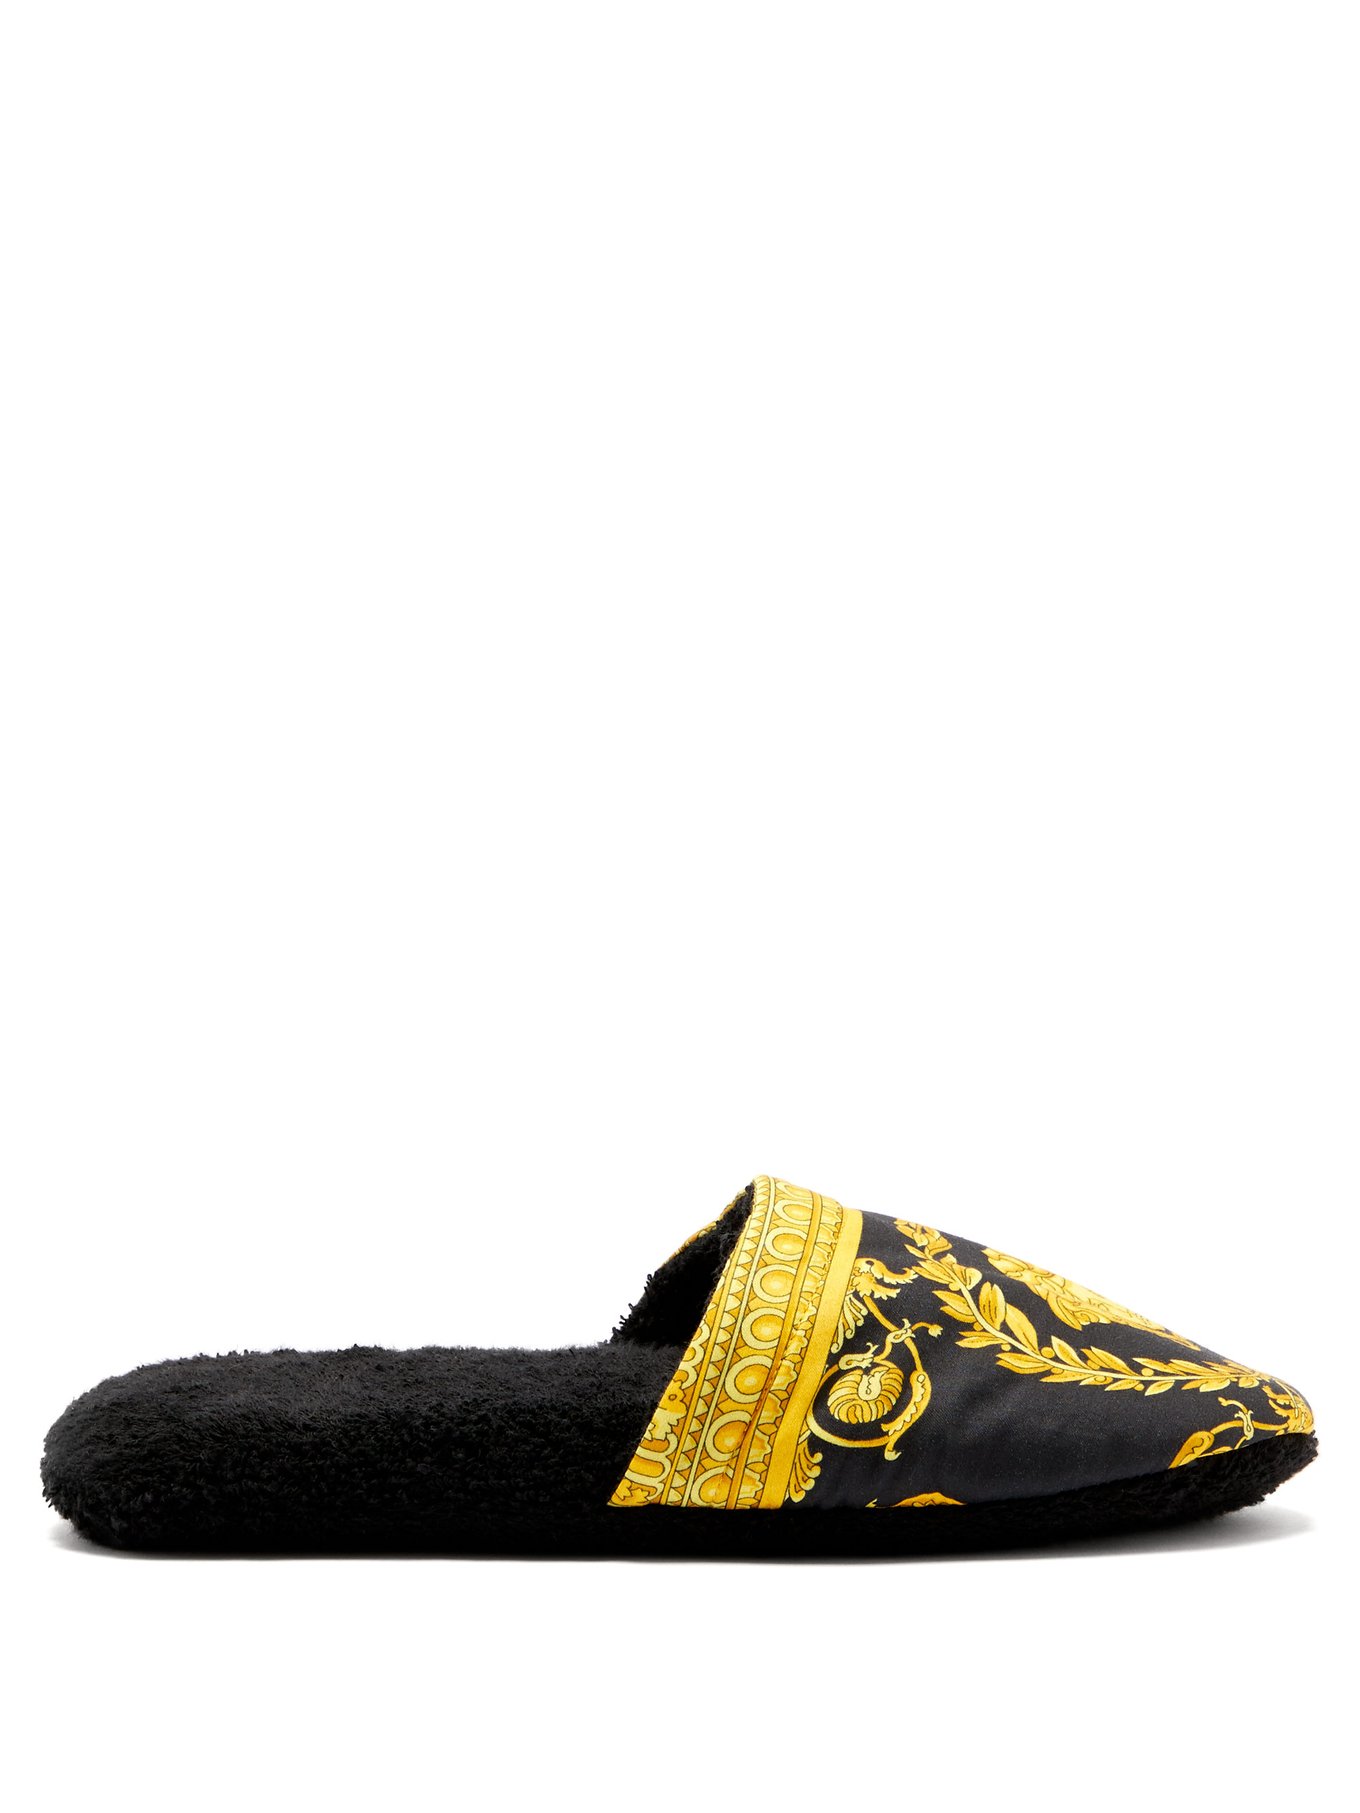 versace slippers colour burgundy